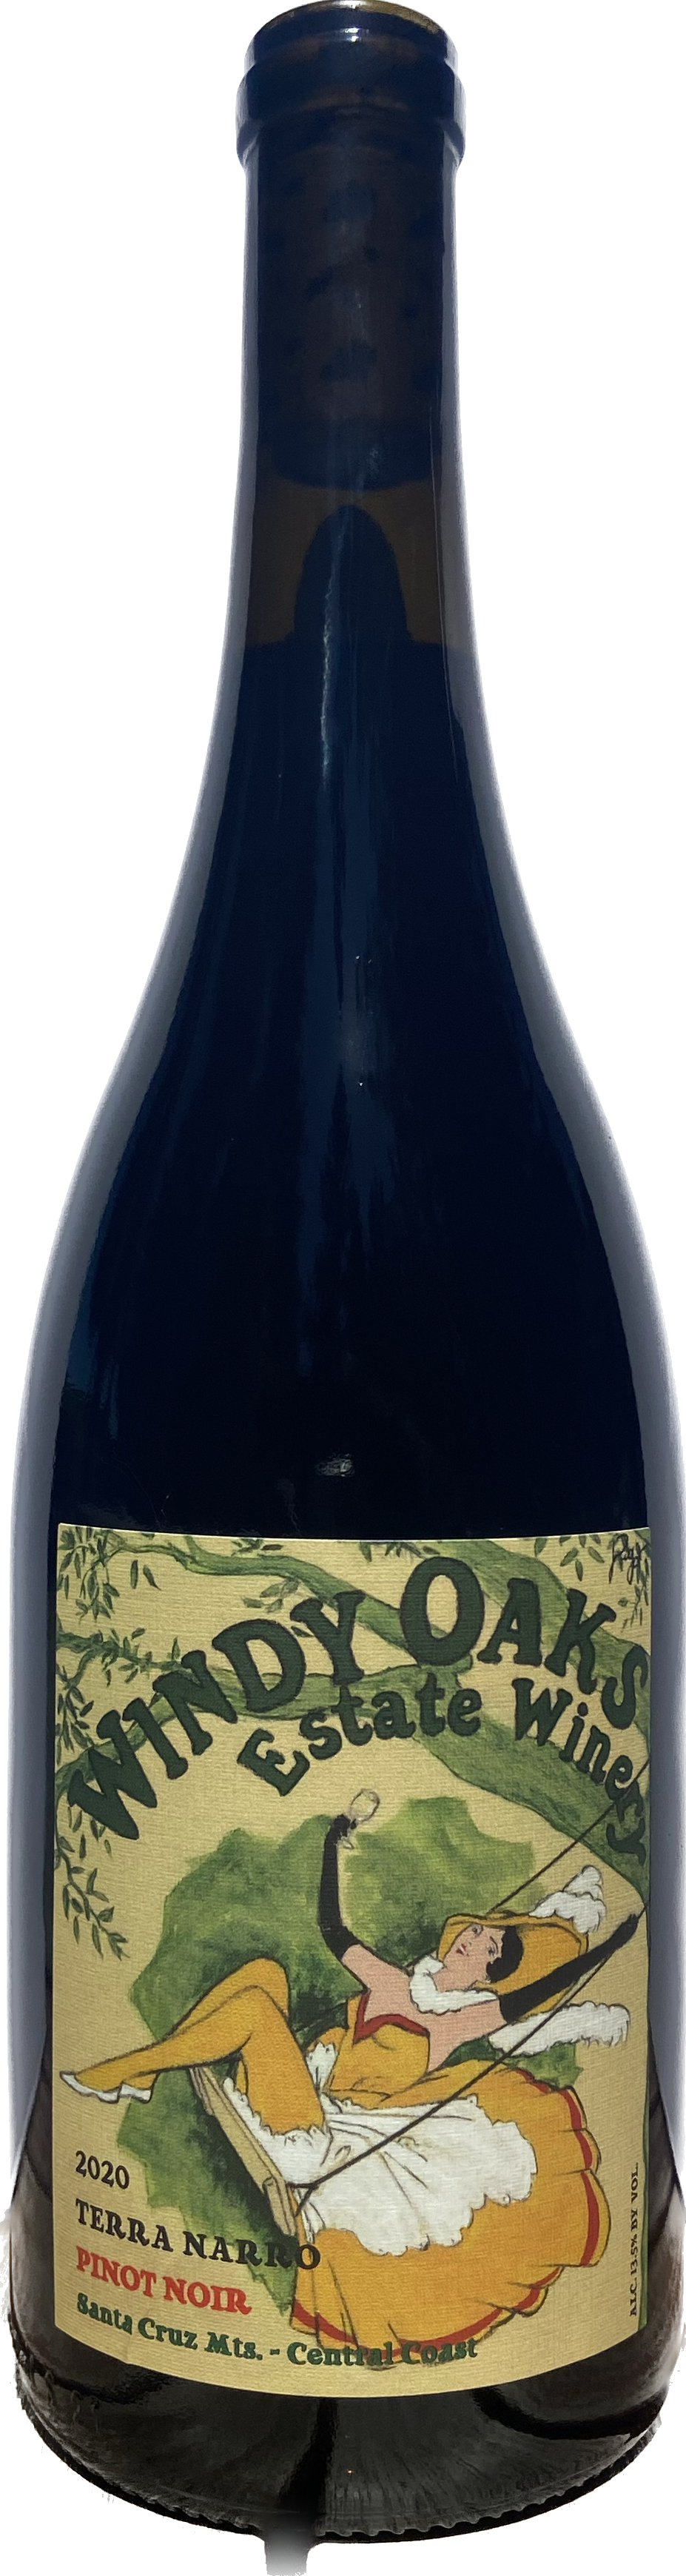 Product Image for 2020 Pinot Noir, Terra Narro